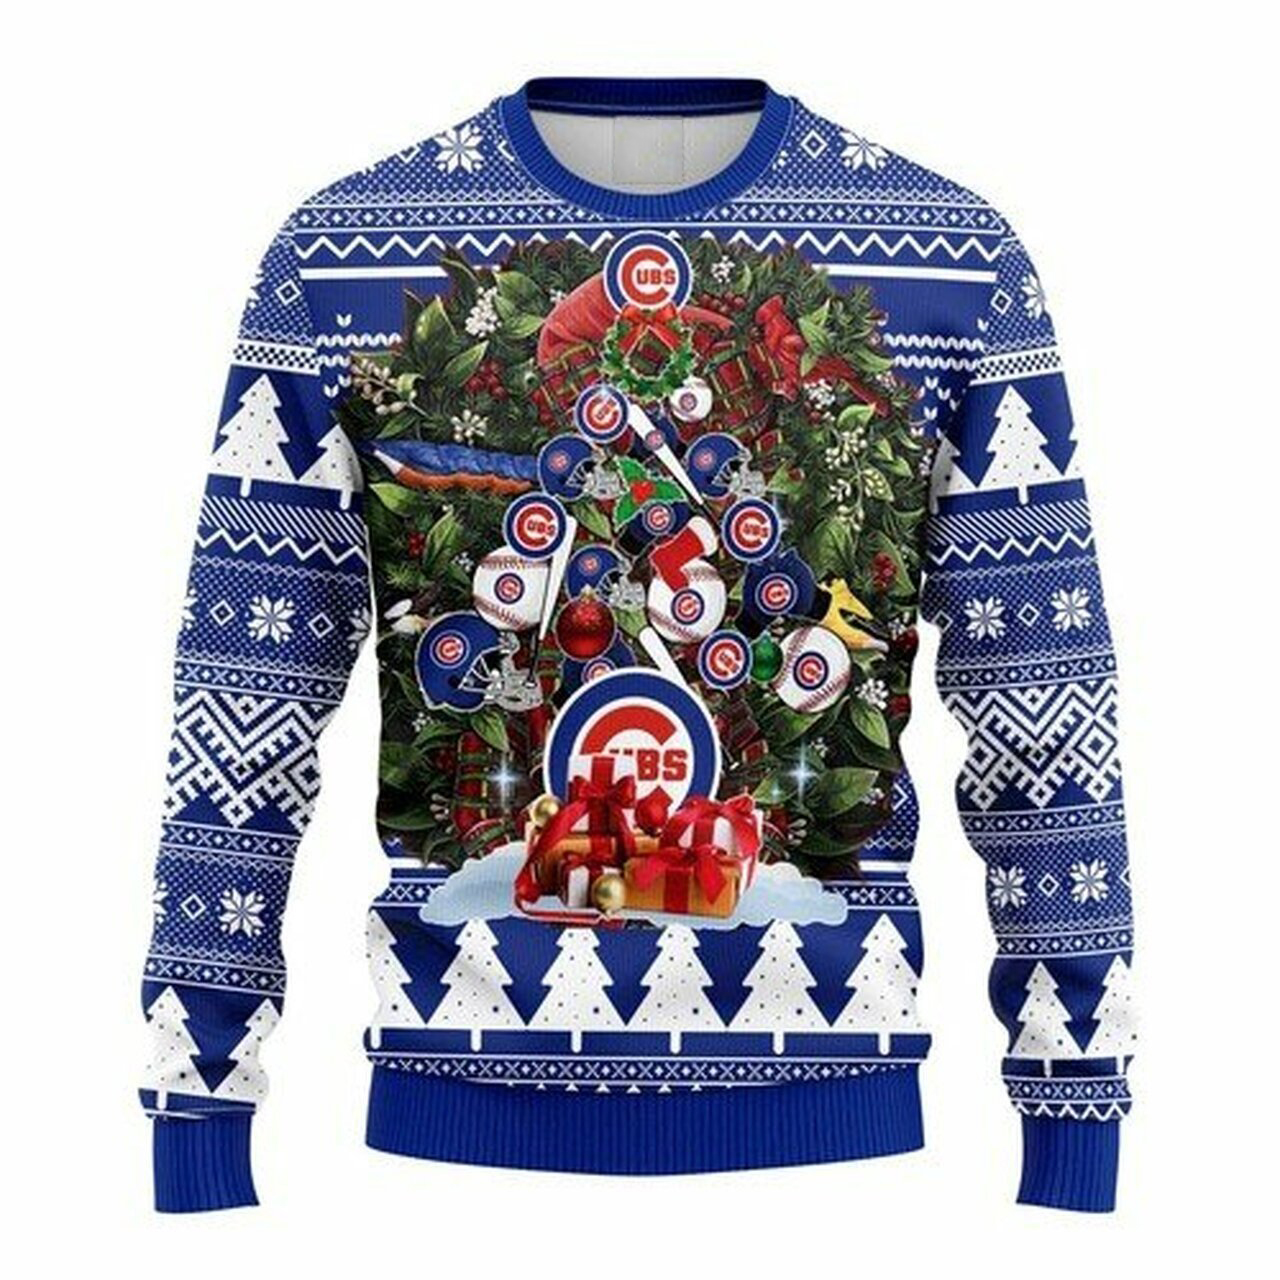 [ HOT ] MLB Chicago Cubs christmas tree ugly sweater – Saleoff 060122